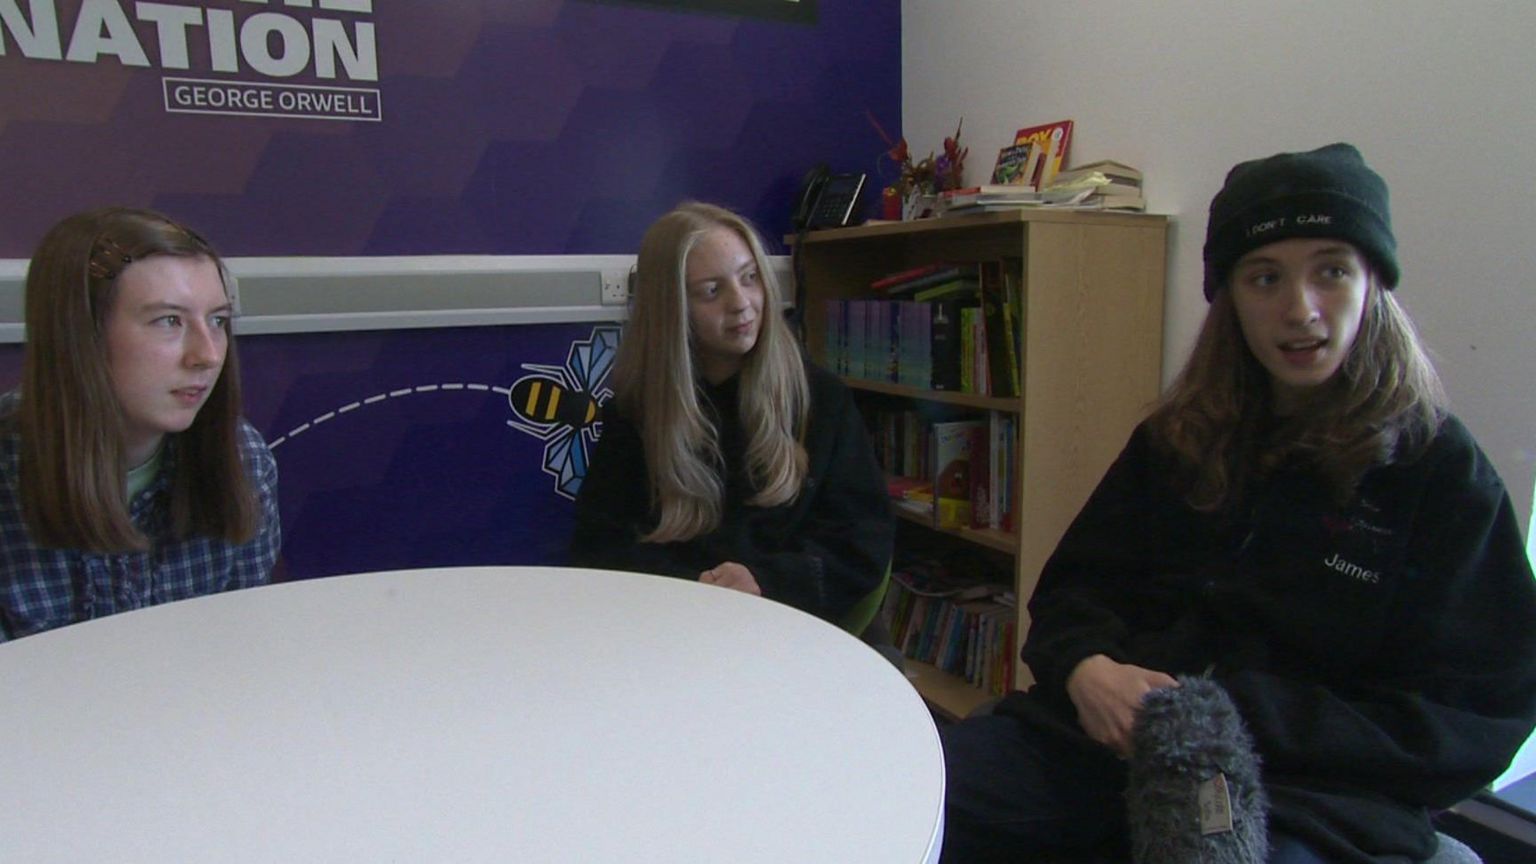 Amy, Mala and James share their concerns about how young people are treated by politicians